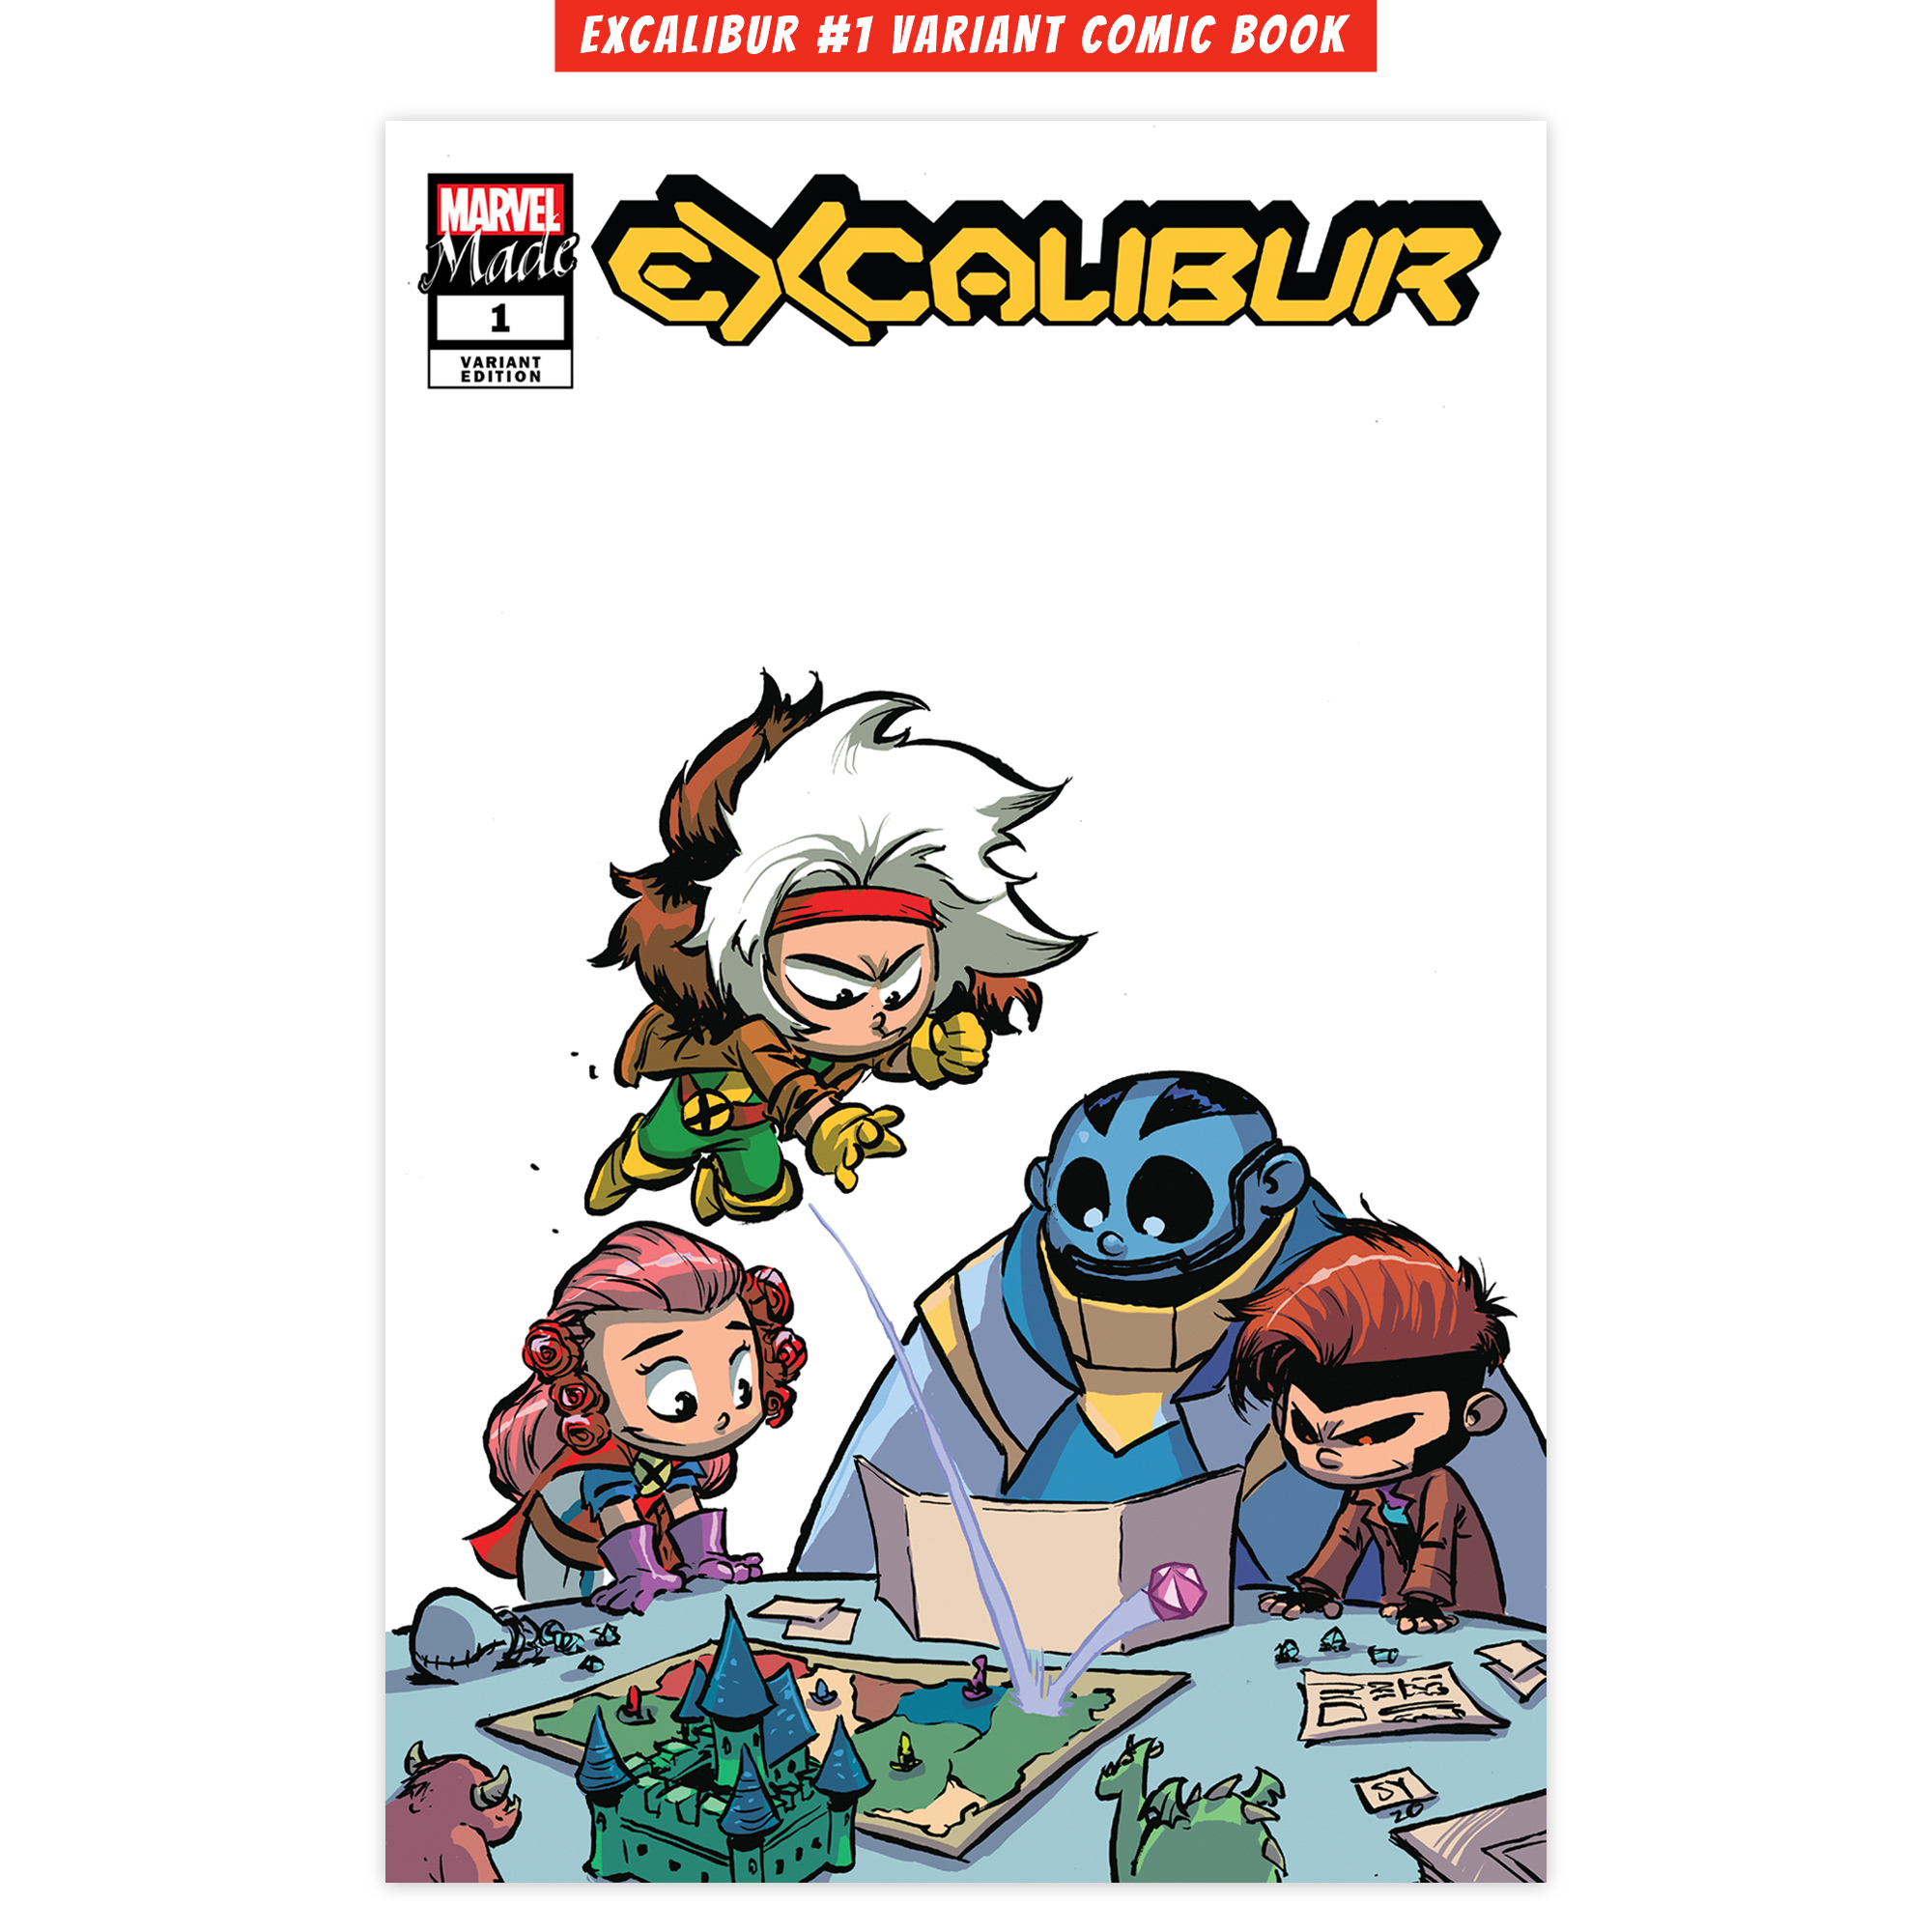 marvelmade-comiccovers-title-excalibur01mainvariant-2000×2000